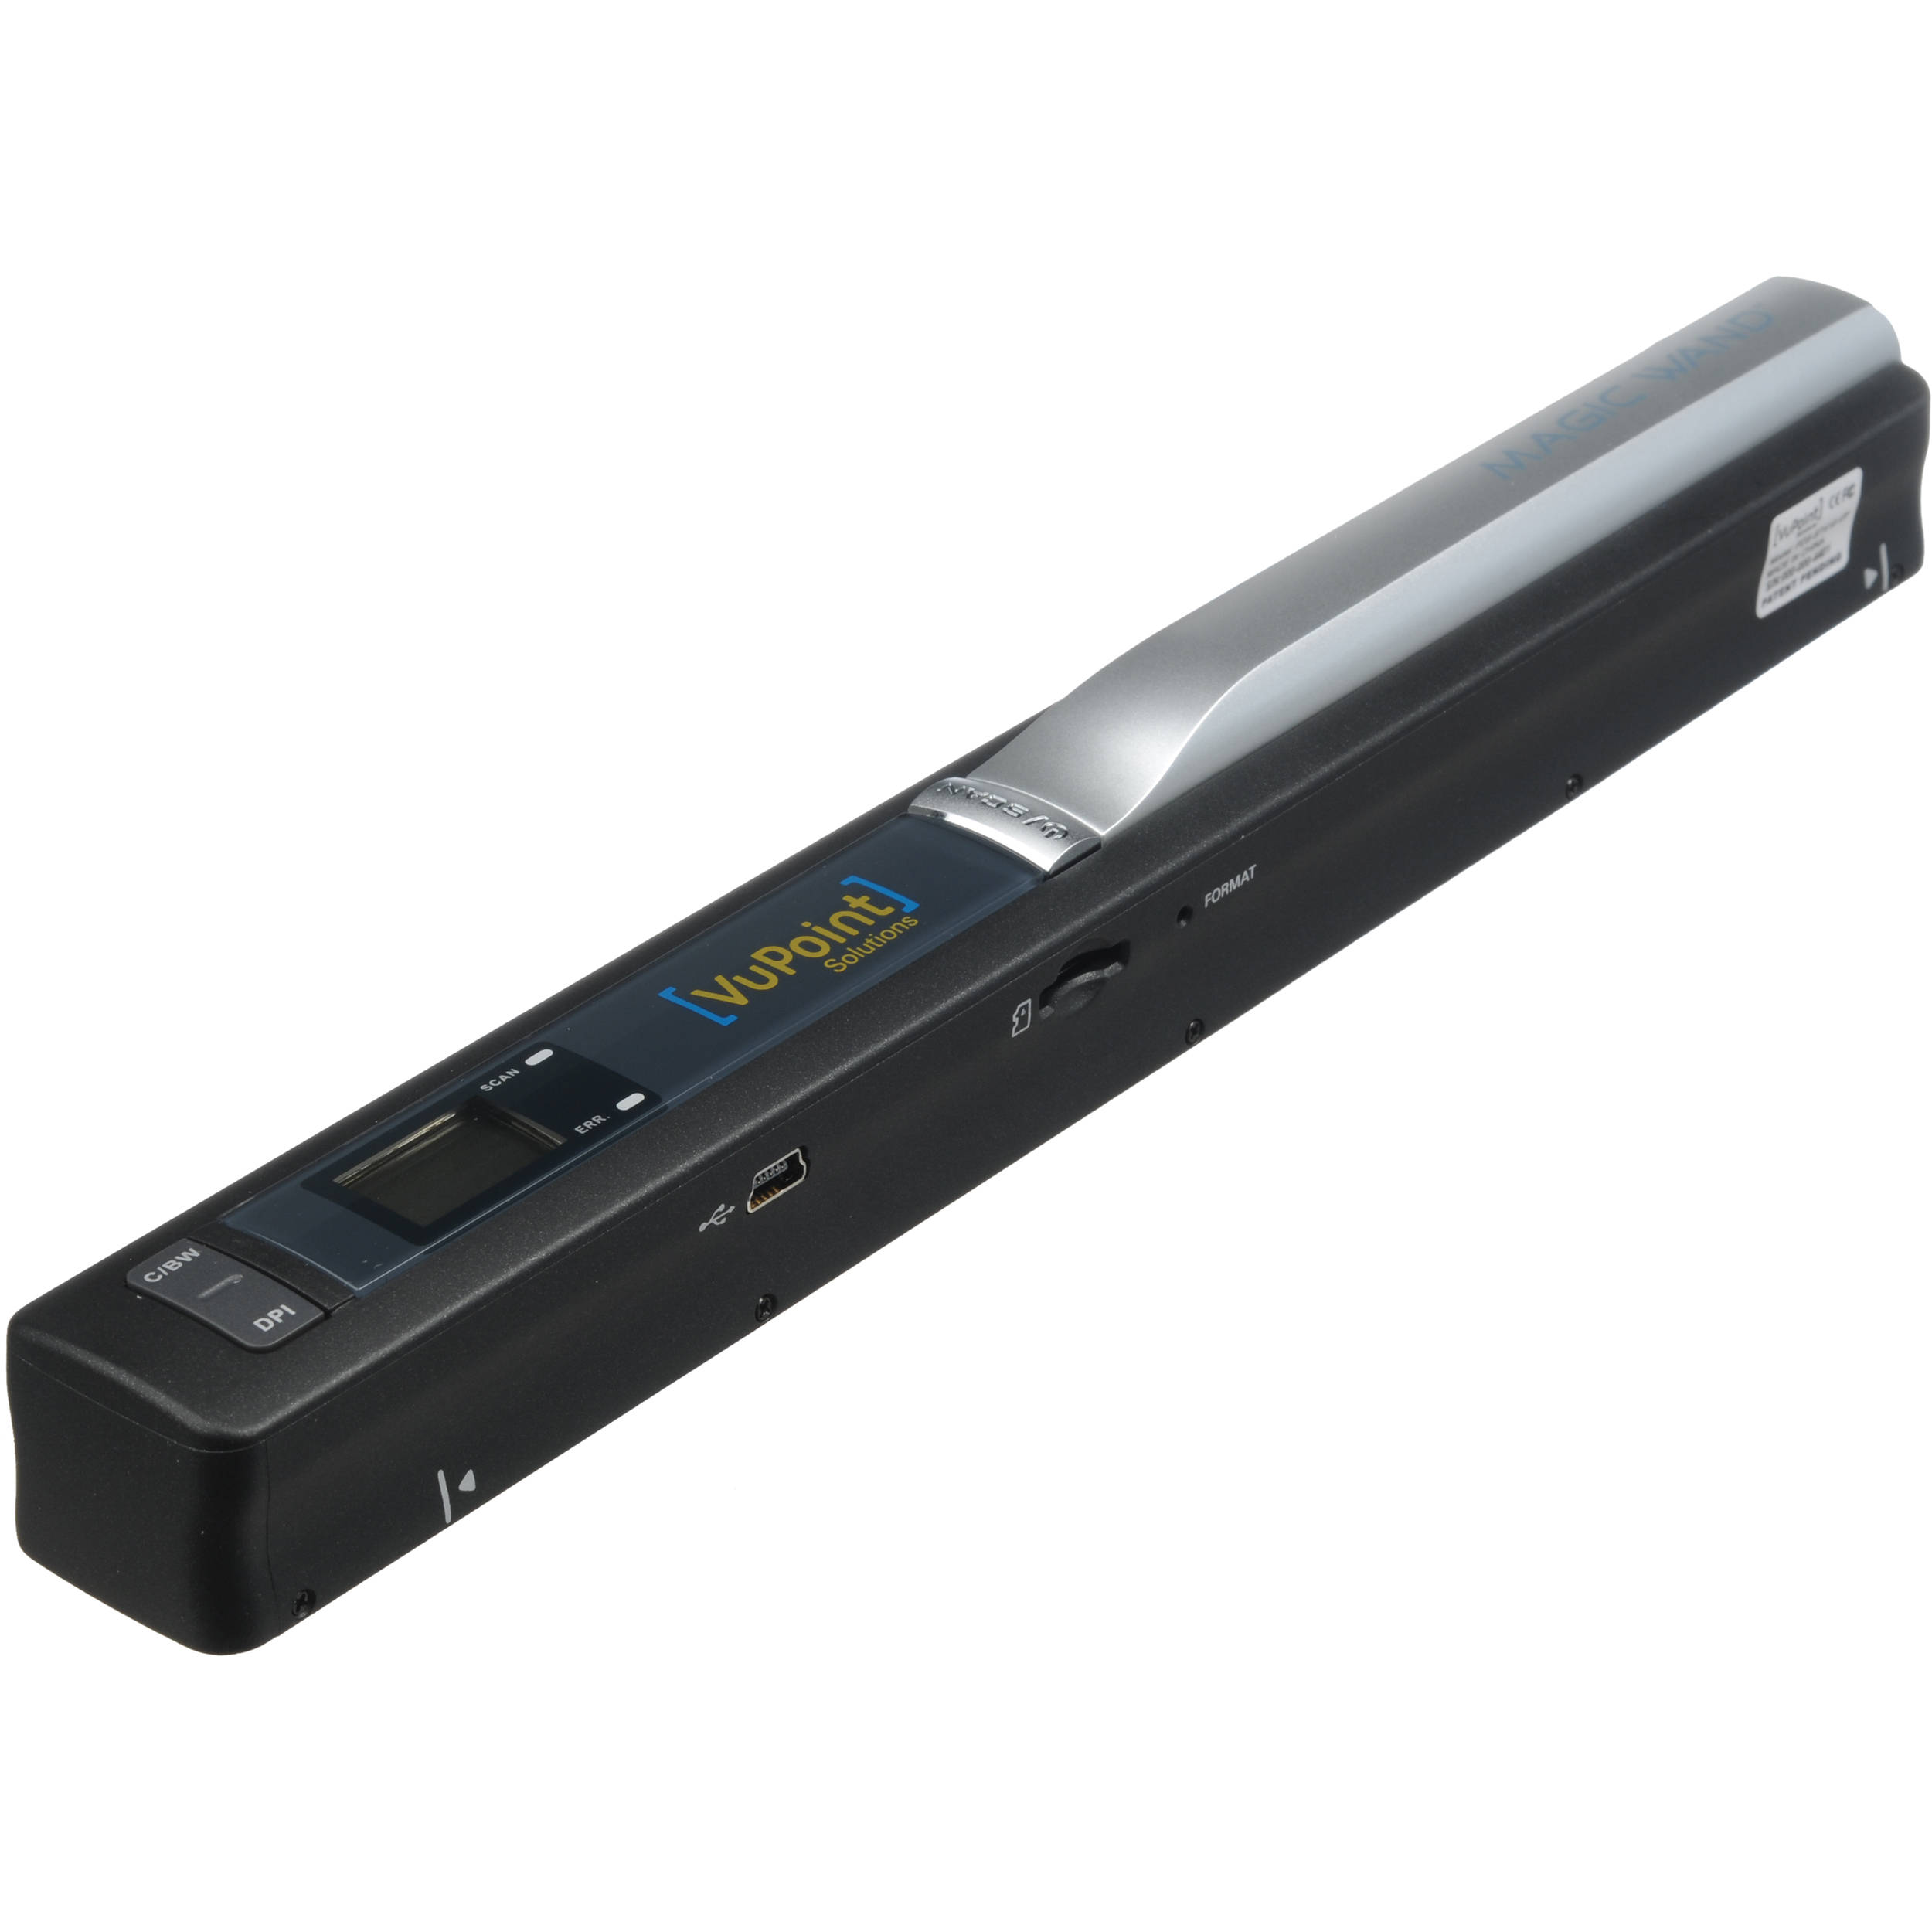 iscan wand portable scanner manual